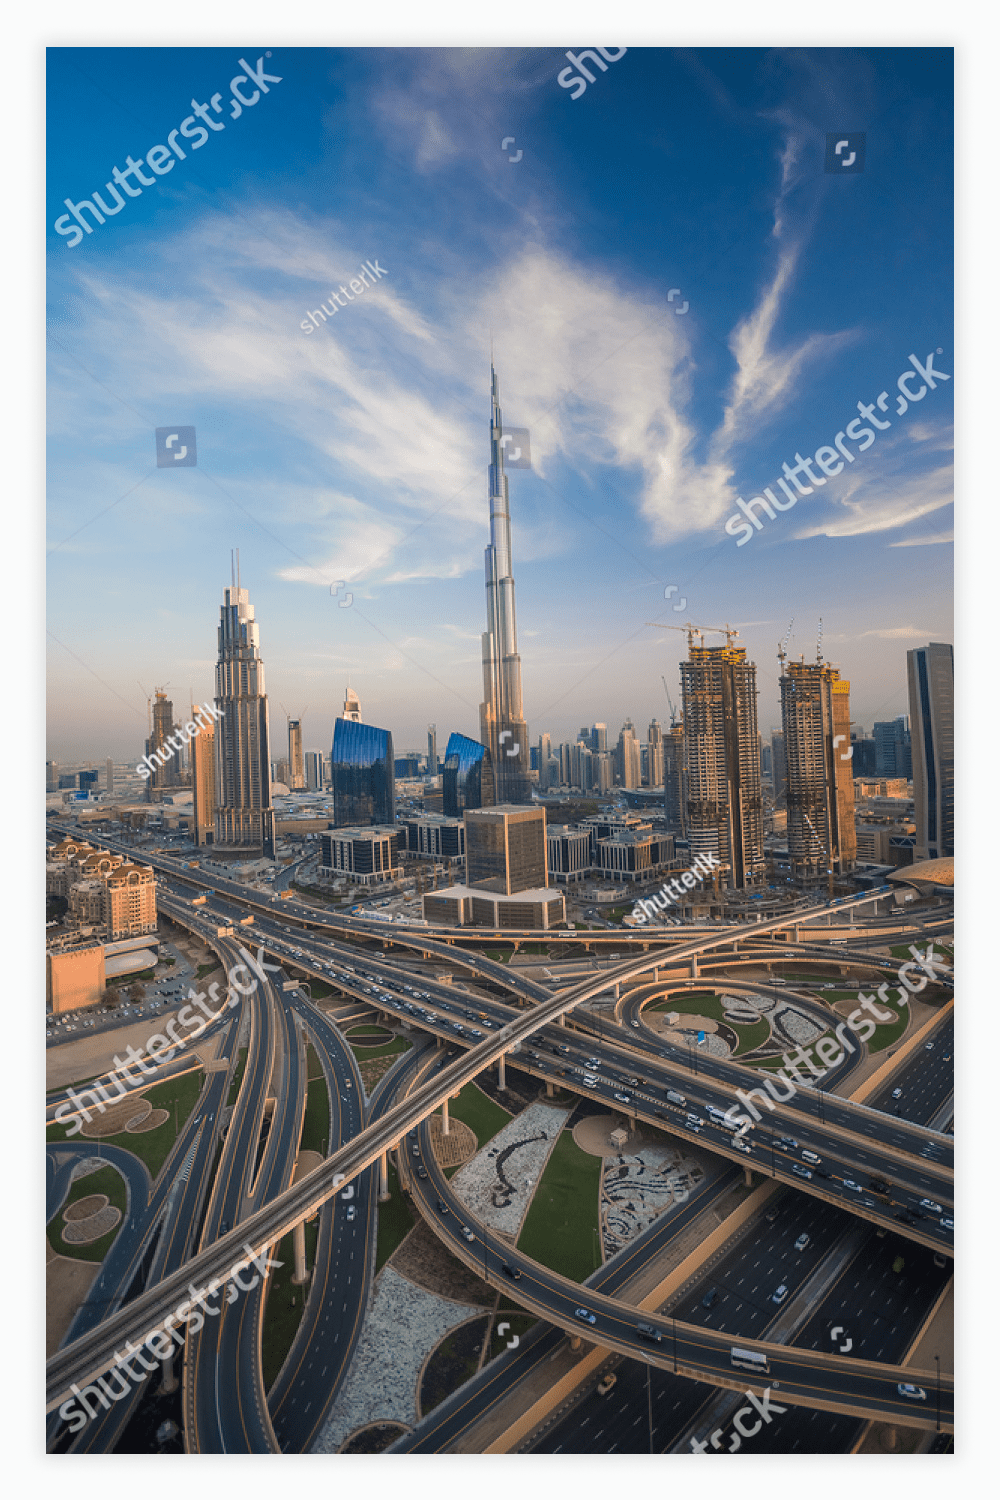 Dubai skyline with beautiful city close to it's busiest highway on traffic.